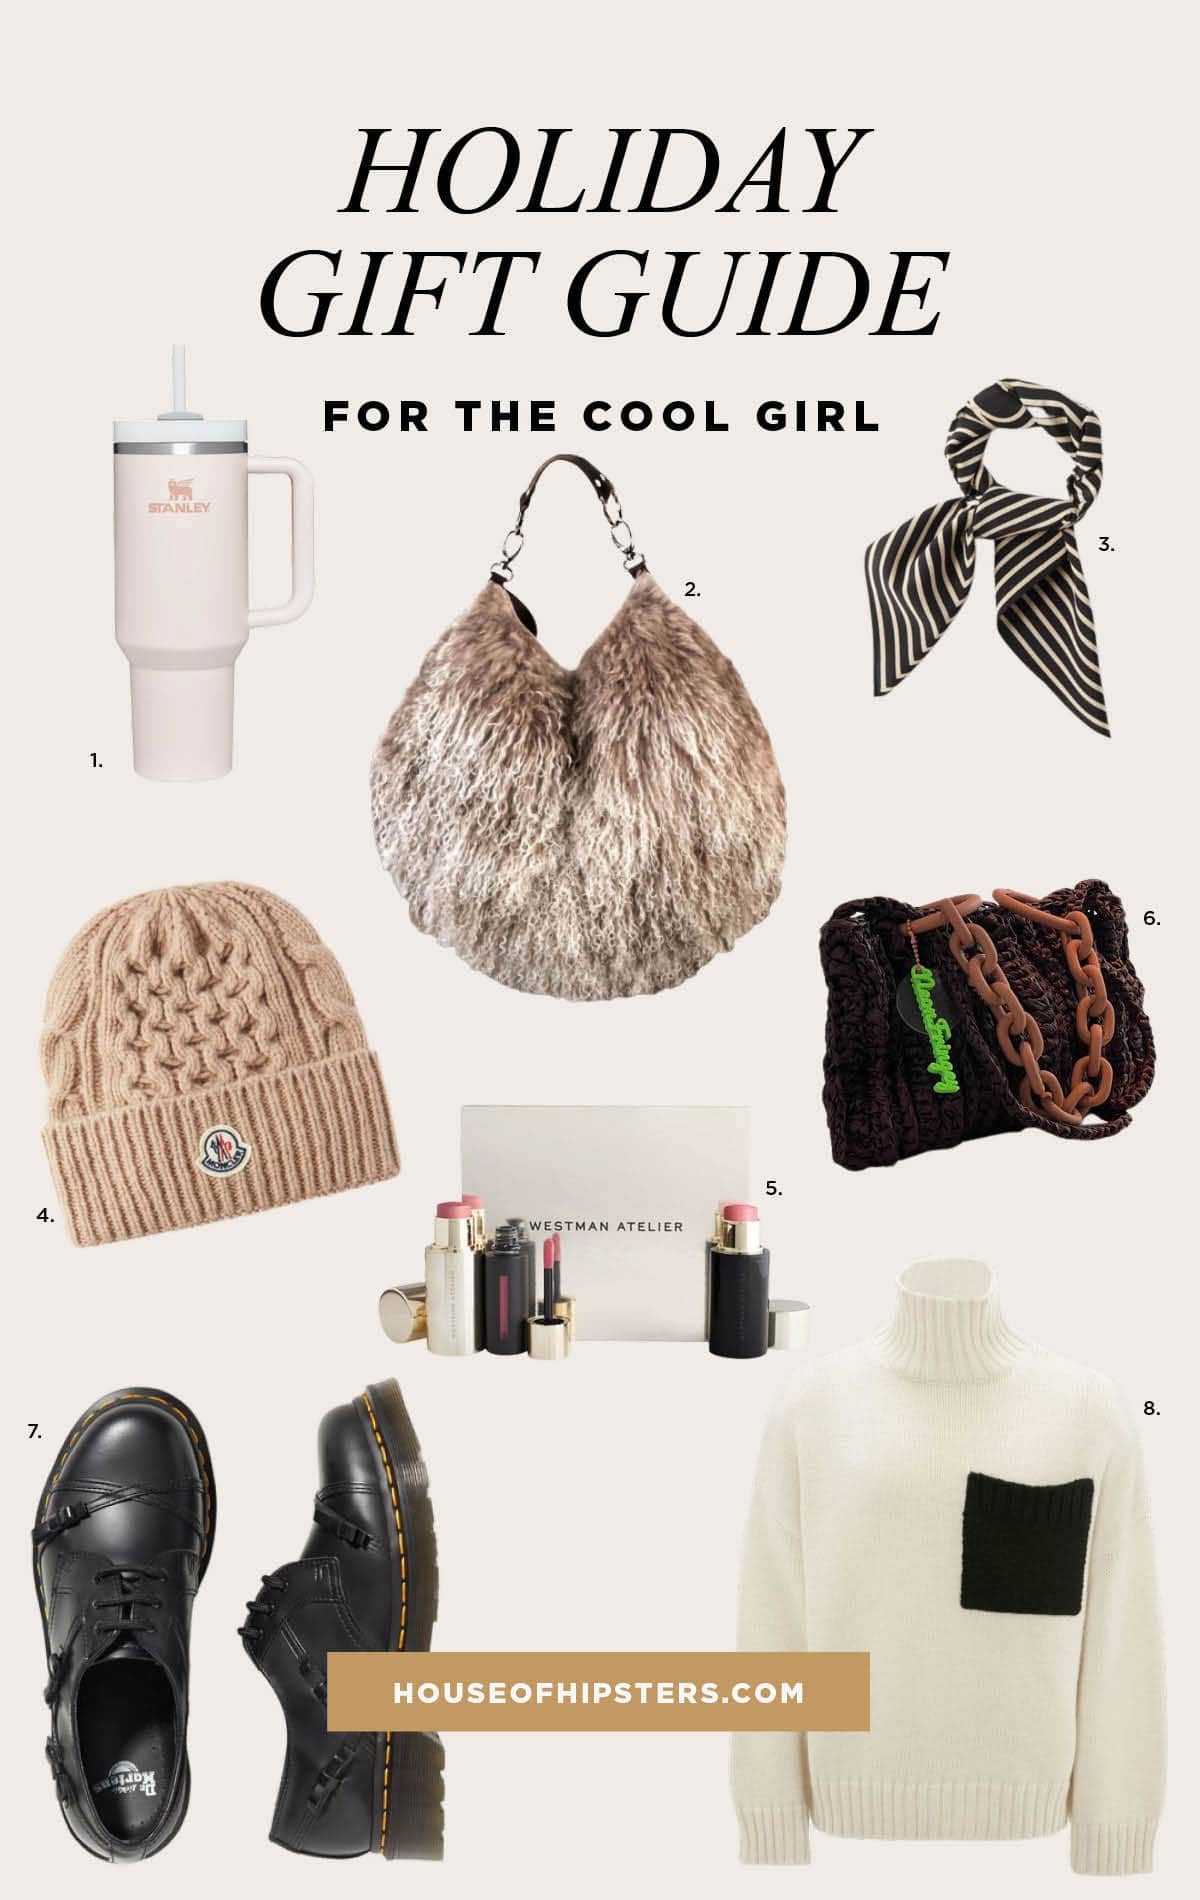 Unique gifts for her - holiday gift guide ideas for the cool girl